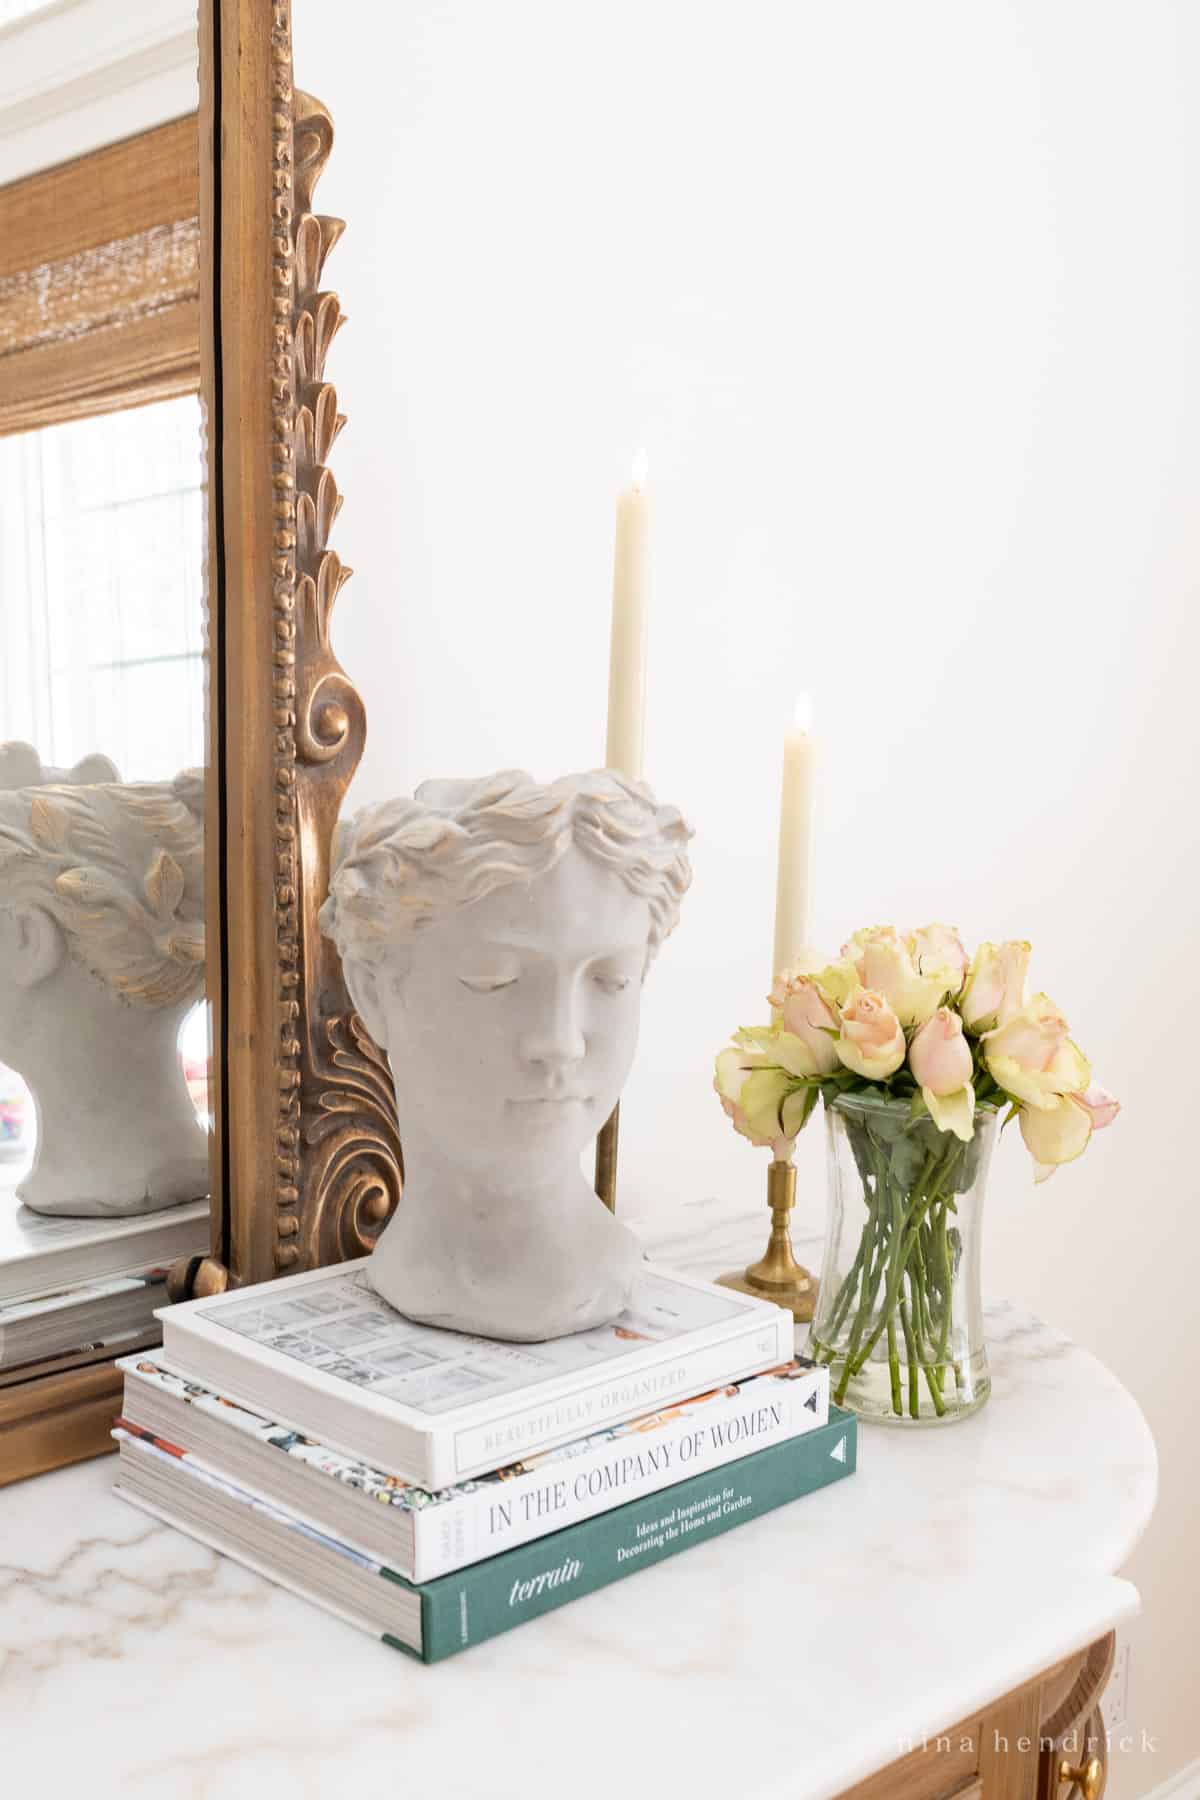 Vignette decor with a stack of books, roman bust, a vase of flowers, and candle sticks